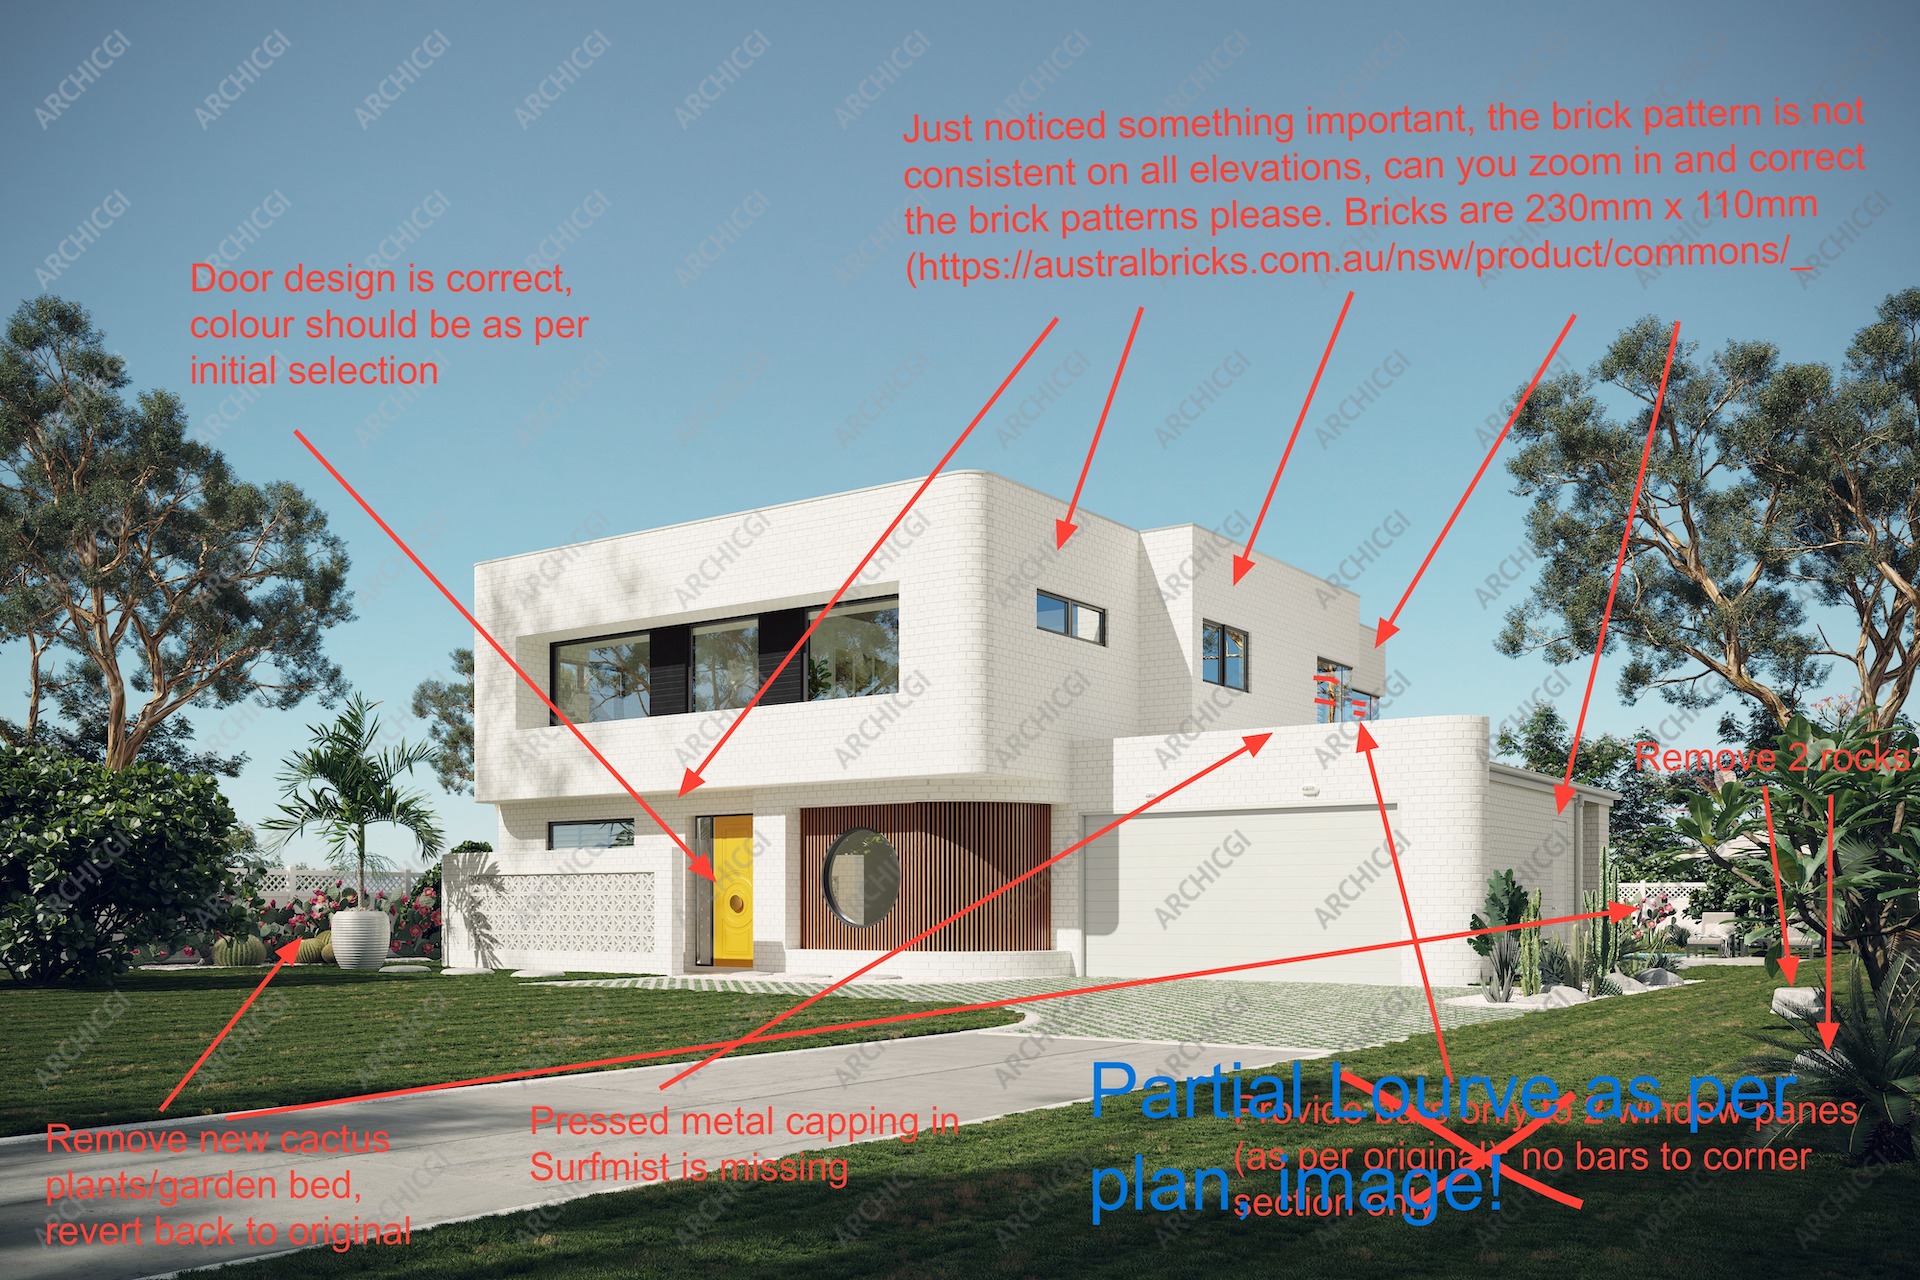 Visual Notes on the 3D Exterior Render from the Client